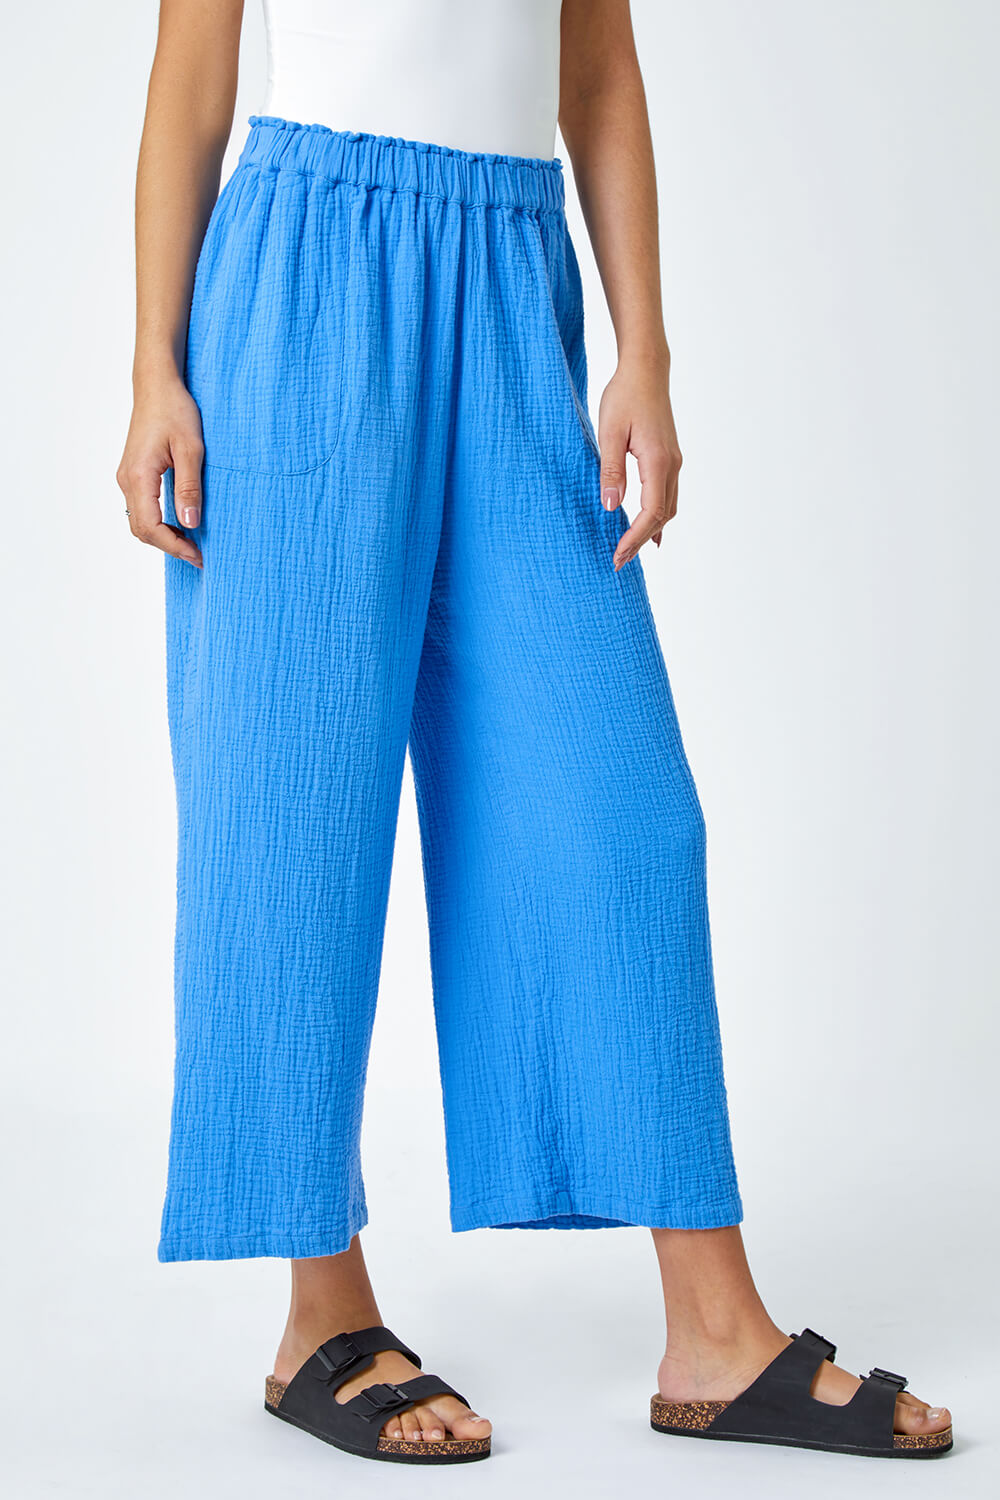 Blue Textured Cotton Culotte Trousers, Image 4 of 5